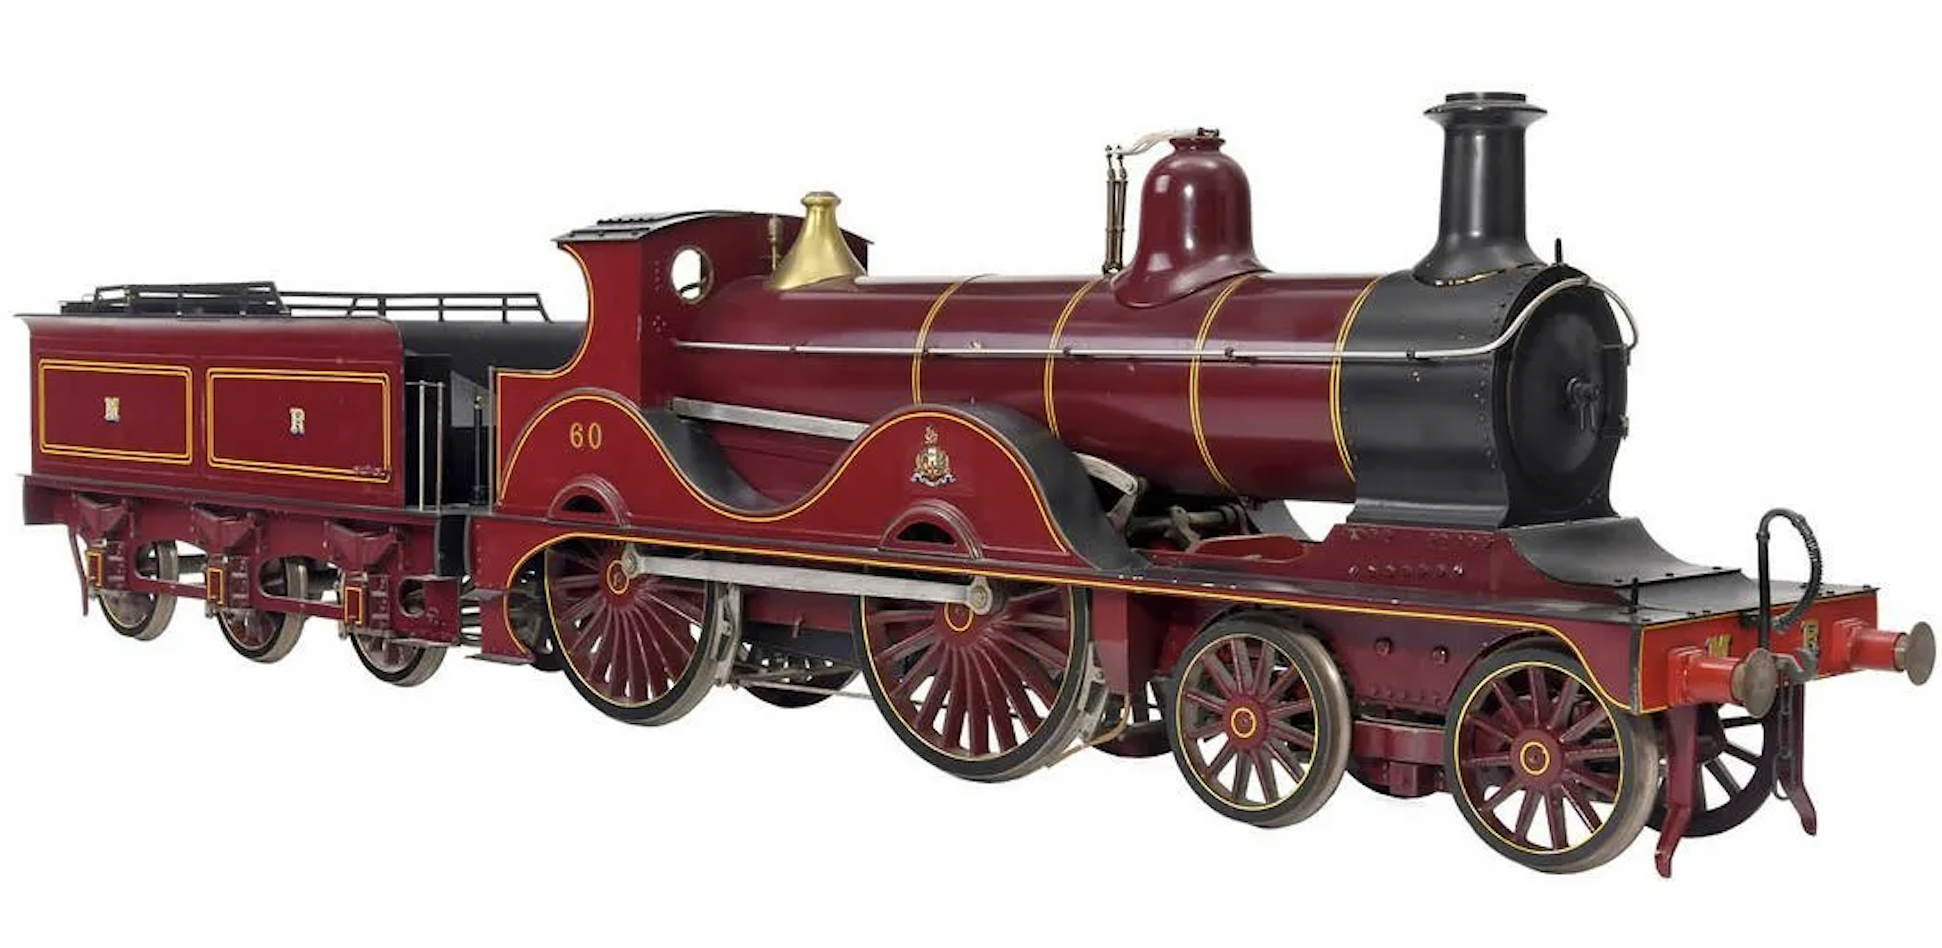 Live-steam model of British Midland Railway locomotive No. 60 with tender, $5,106. Image courtesy of Auction Team Breker and LiveAuctioneers